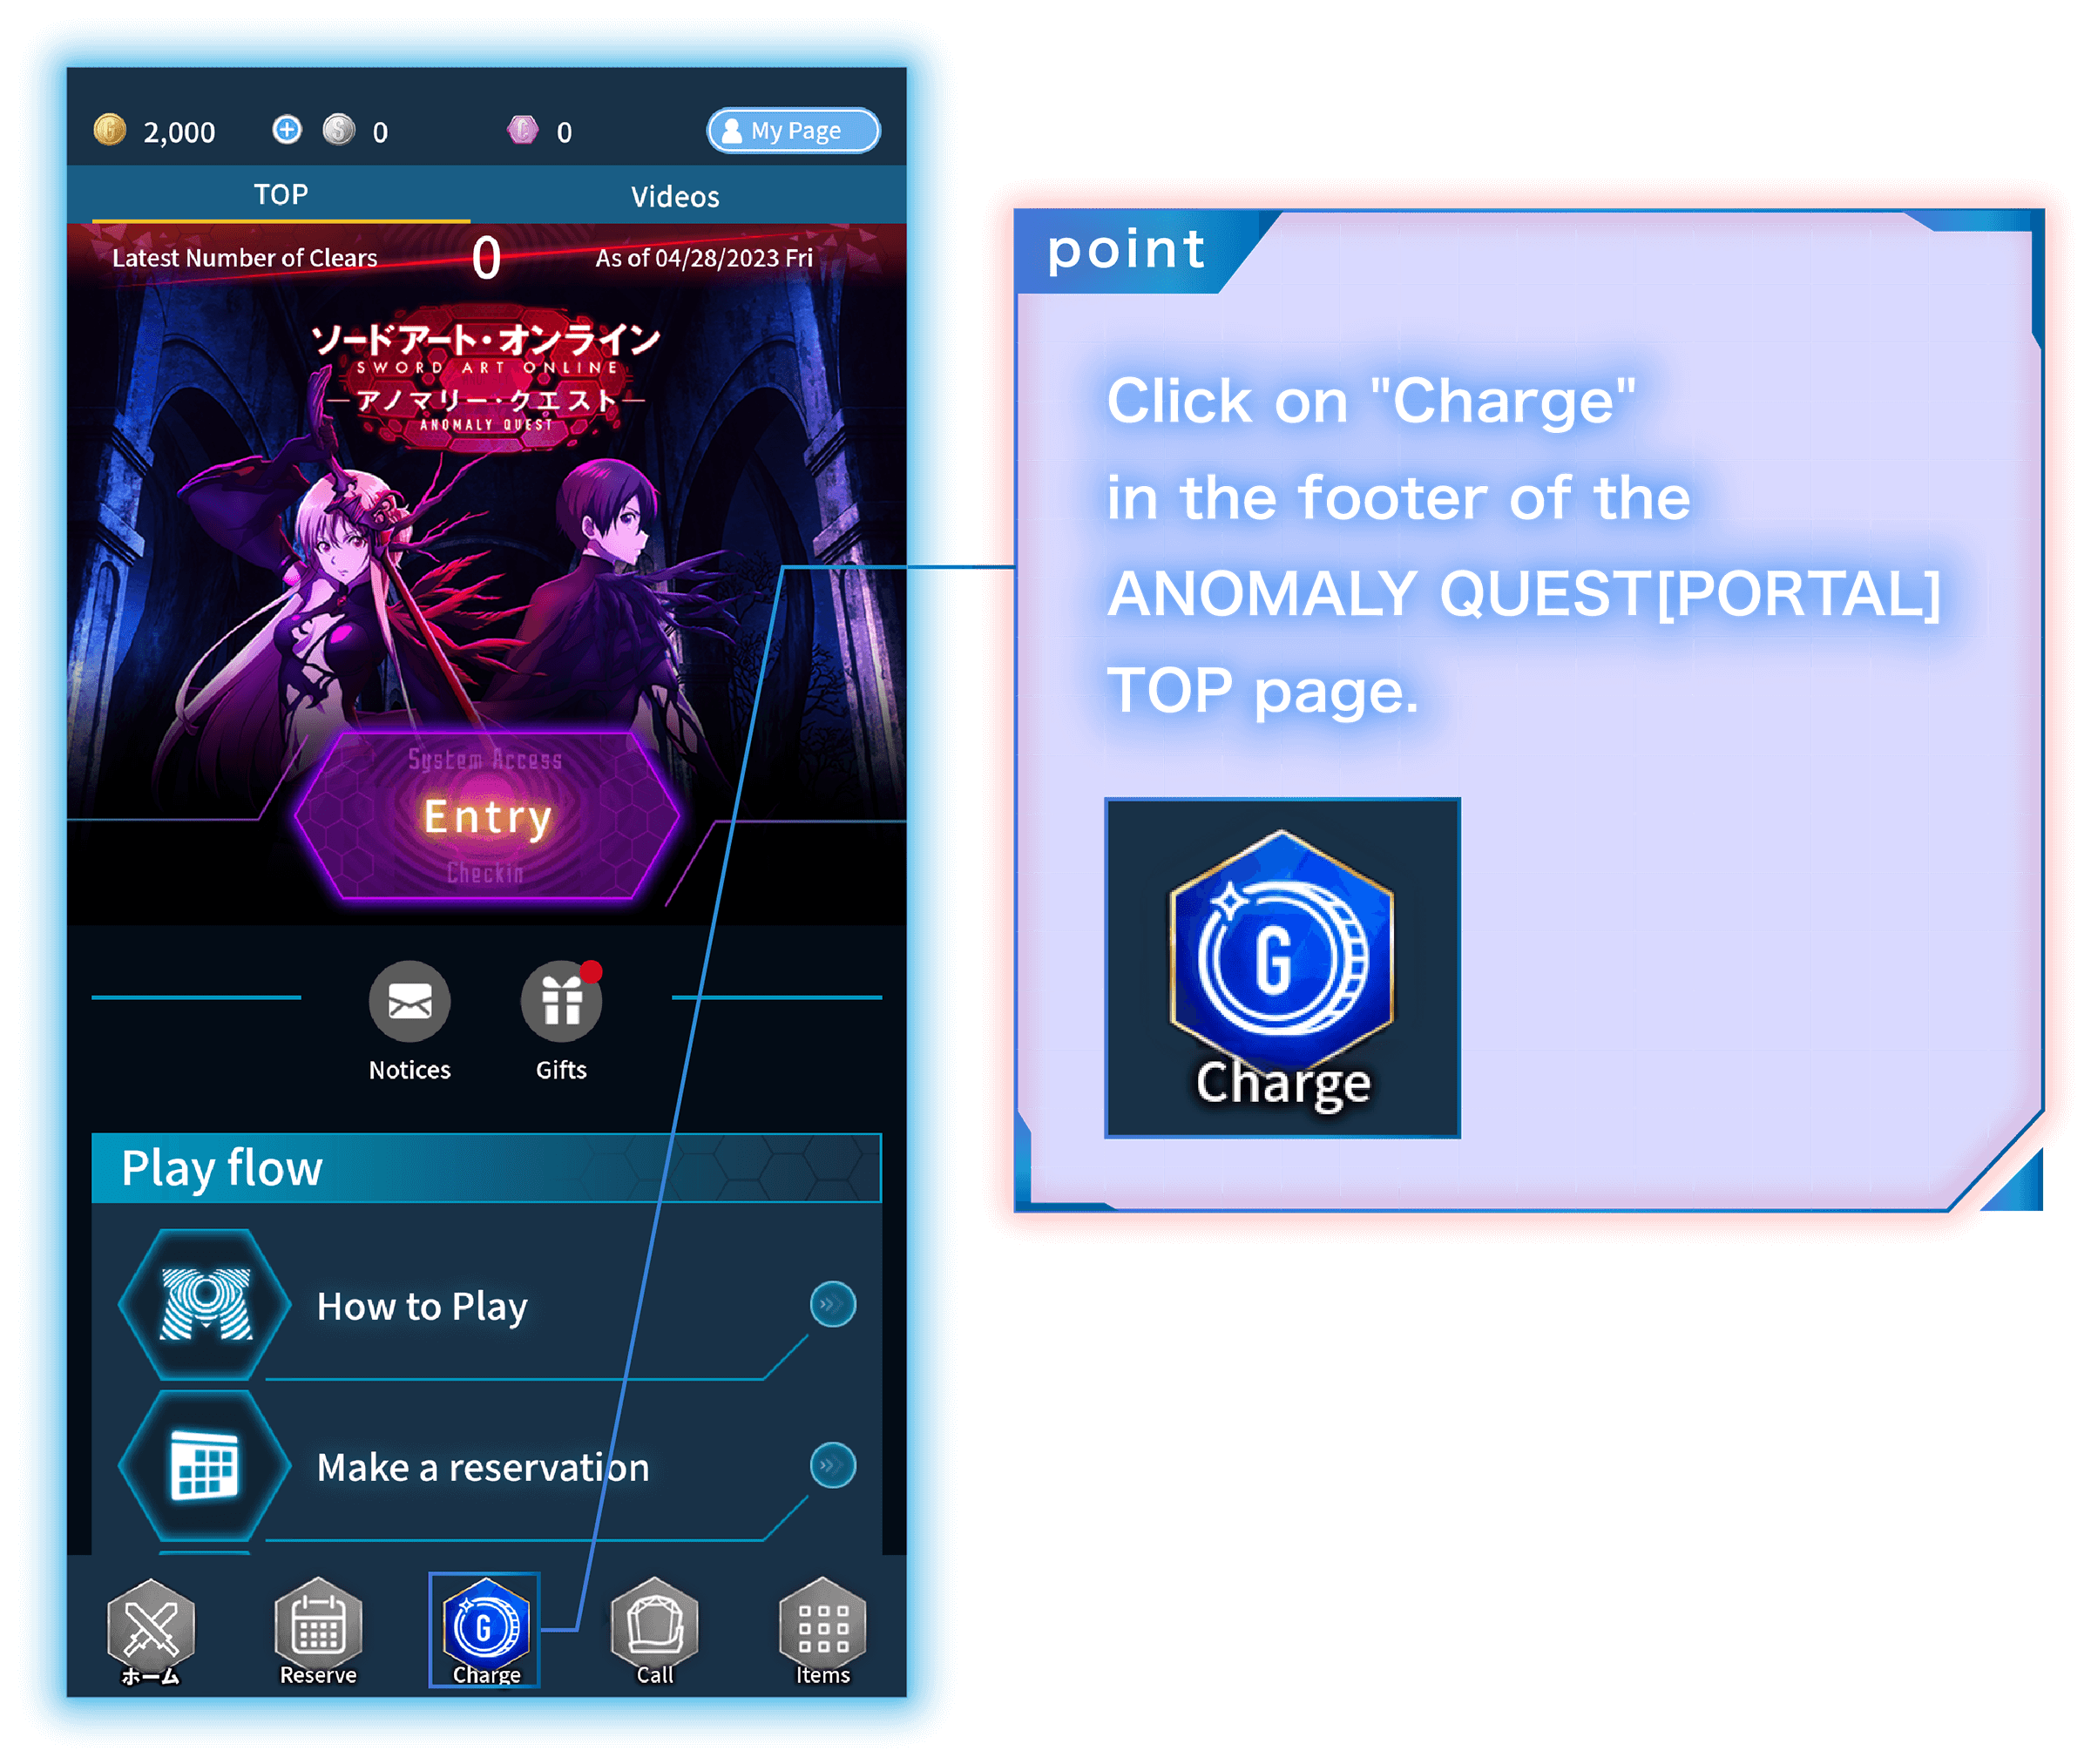 POINT Click on 'Charge' in the footer of the ANOMALY QUEST[PORTAL] TOP page.